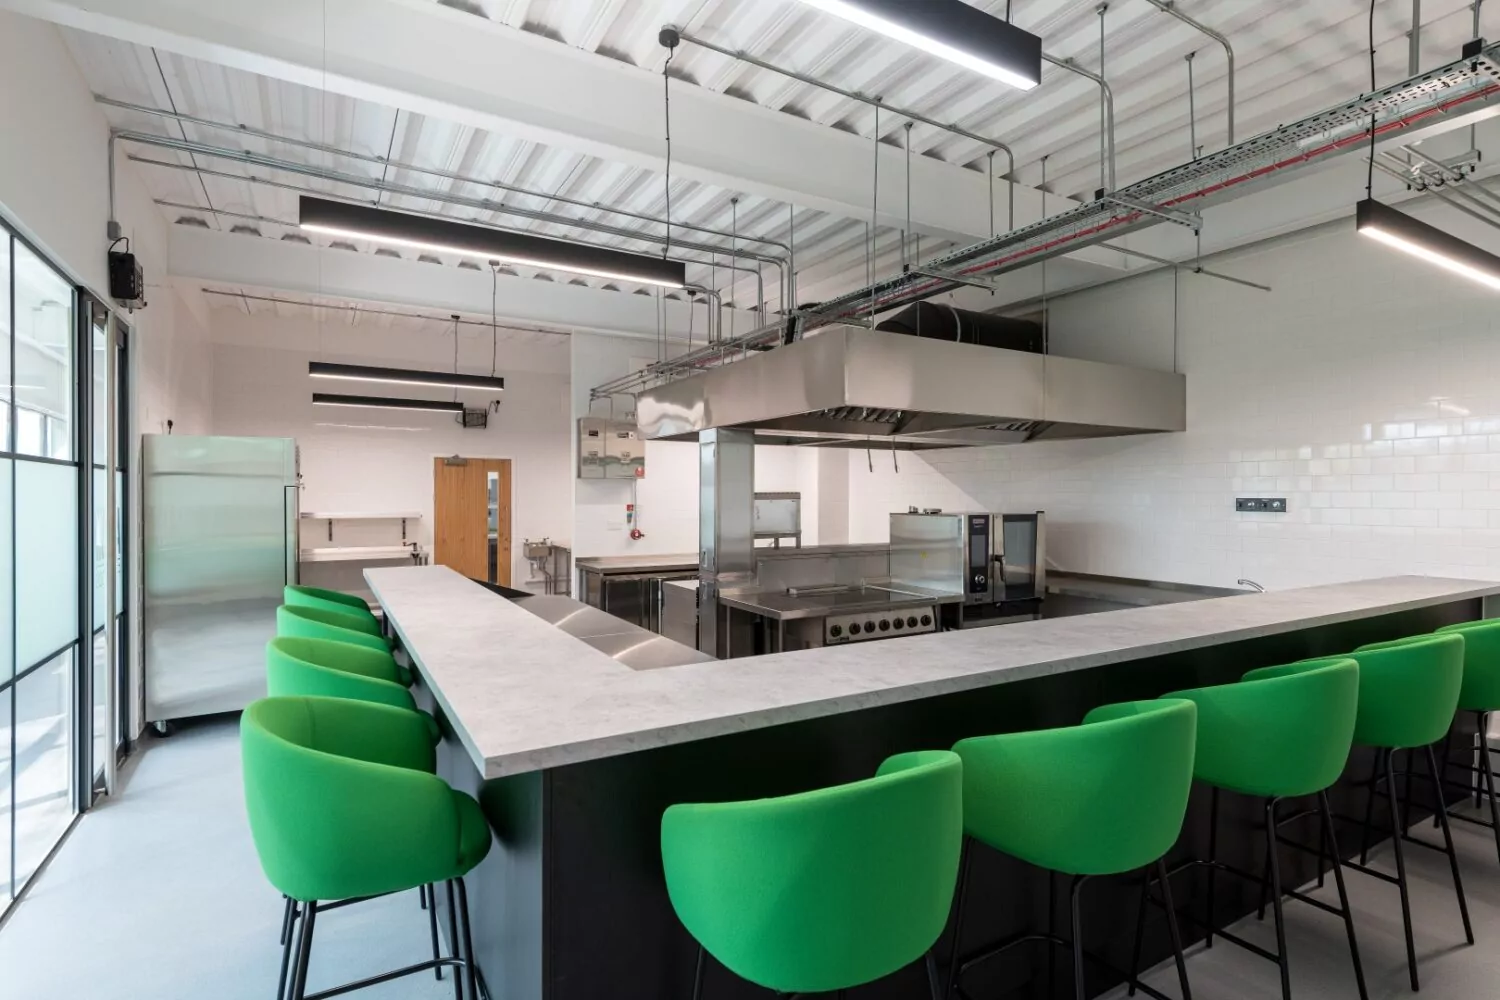 Green poseur height stools and anthracite bar in a commercial tasting kitchen in Kent.